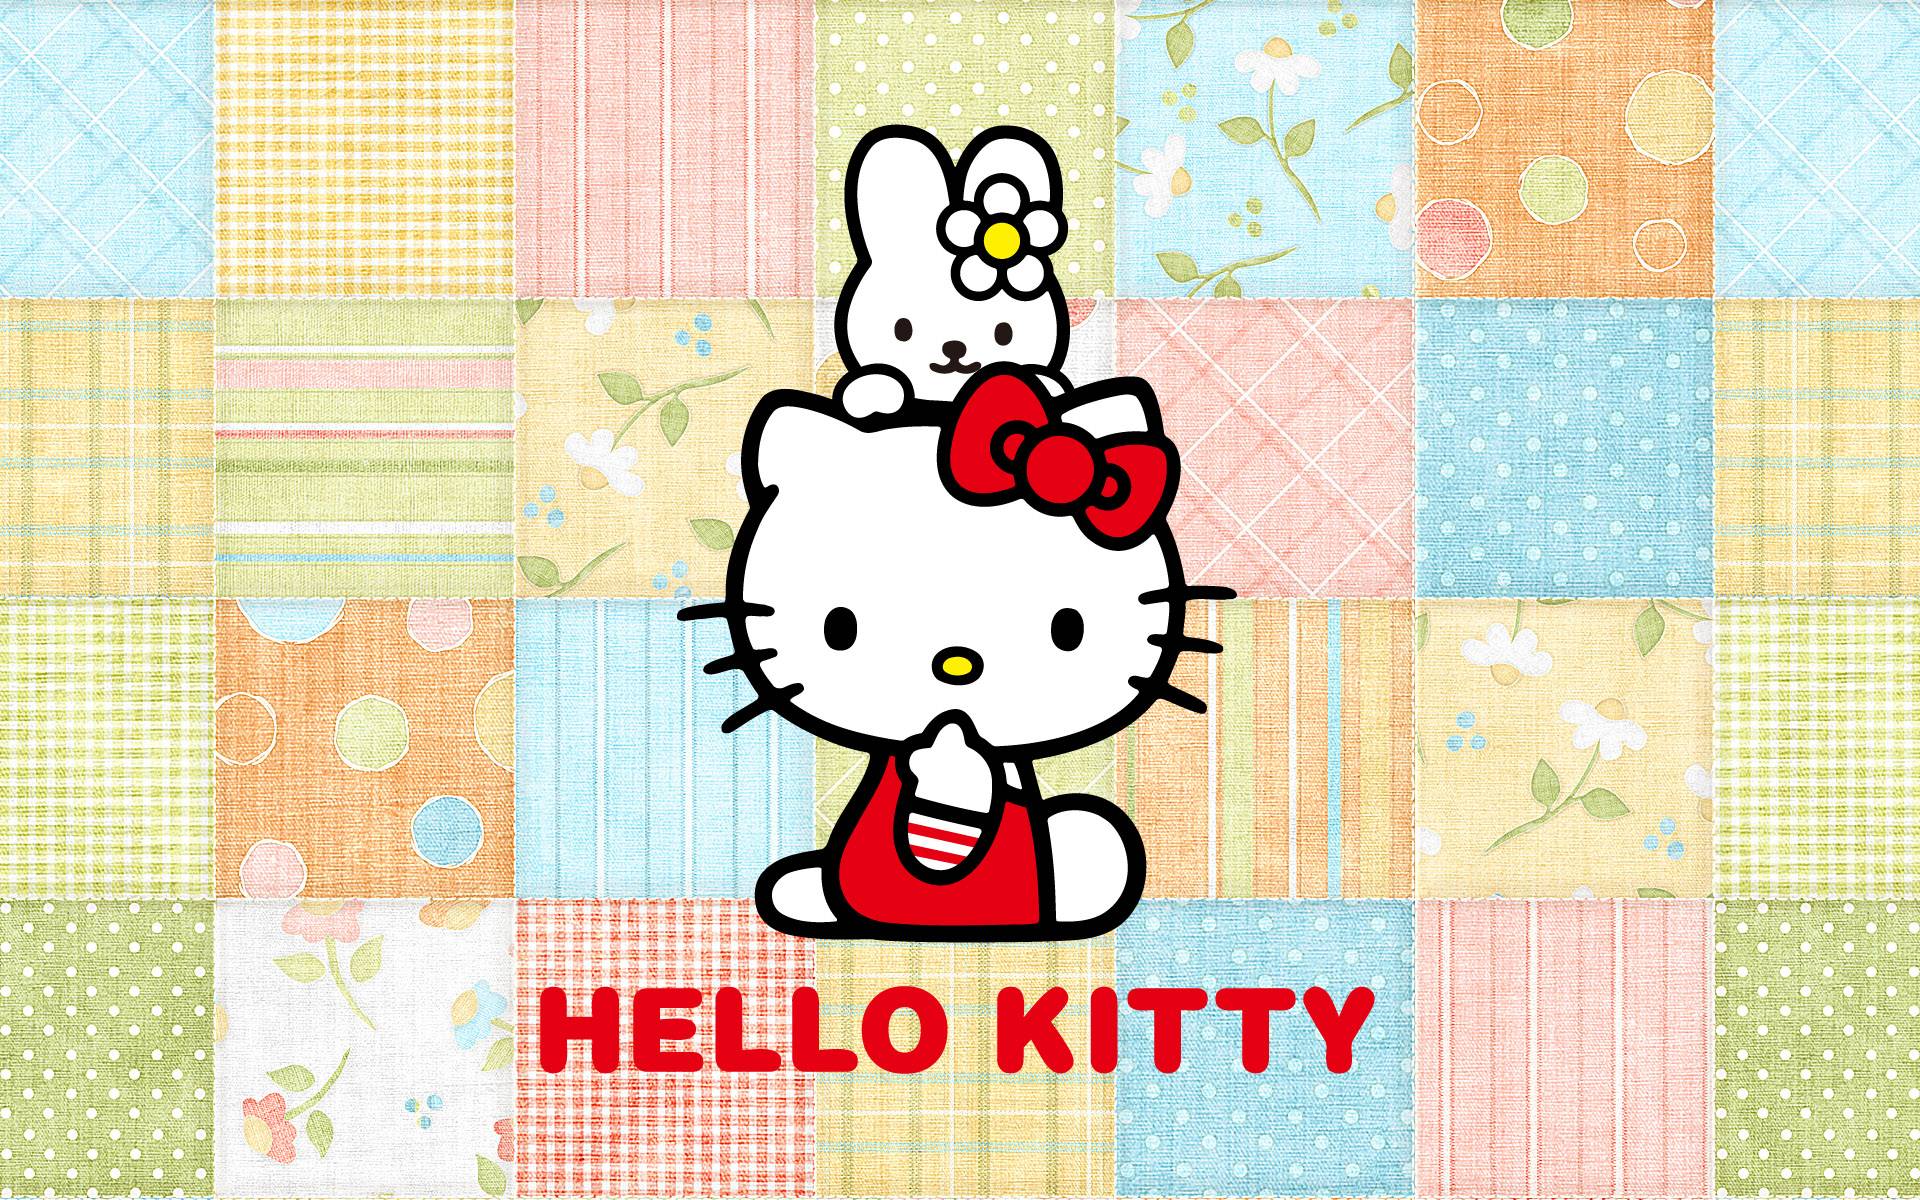 Hello kitty angel and devil wallpaper